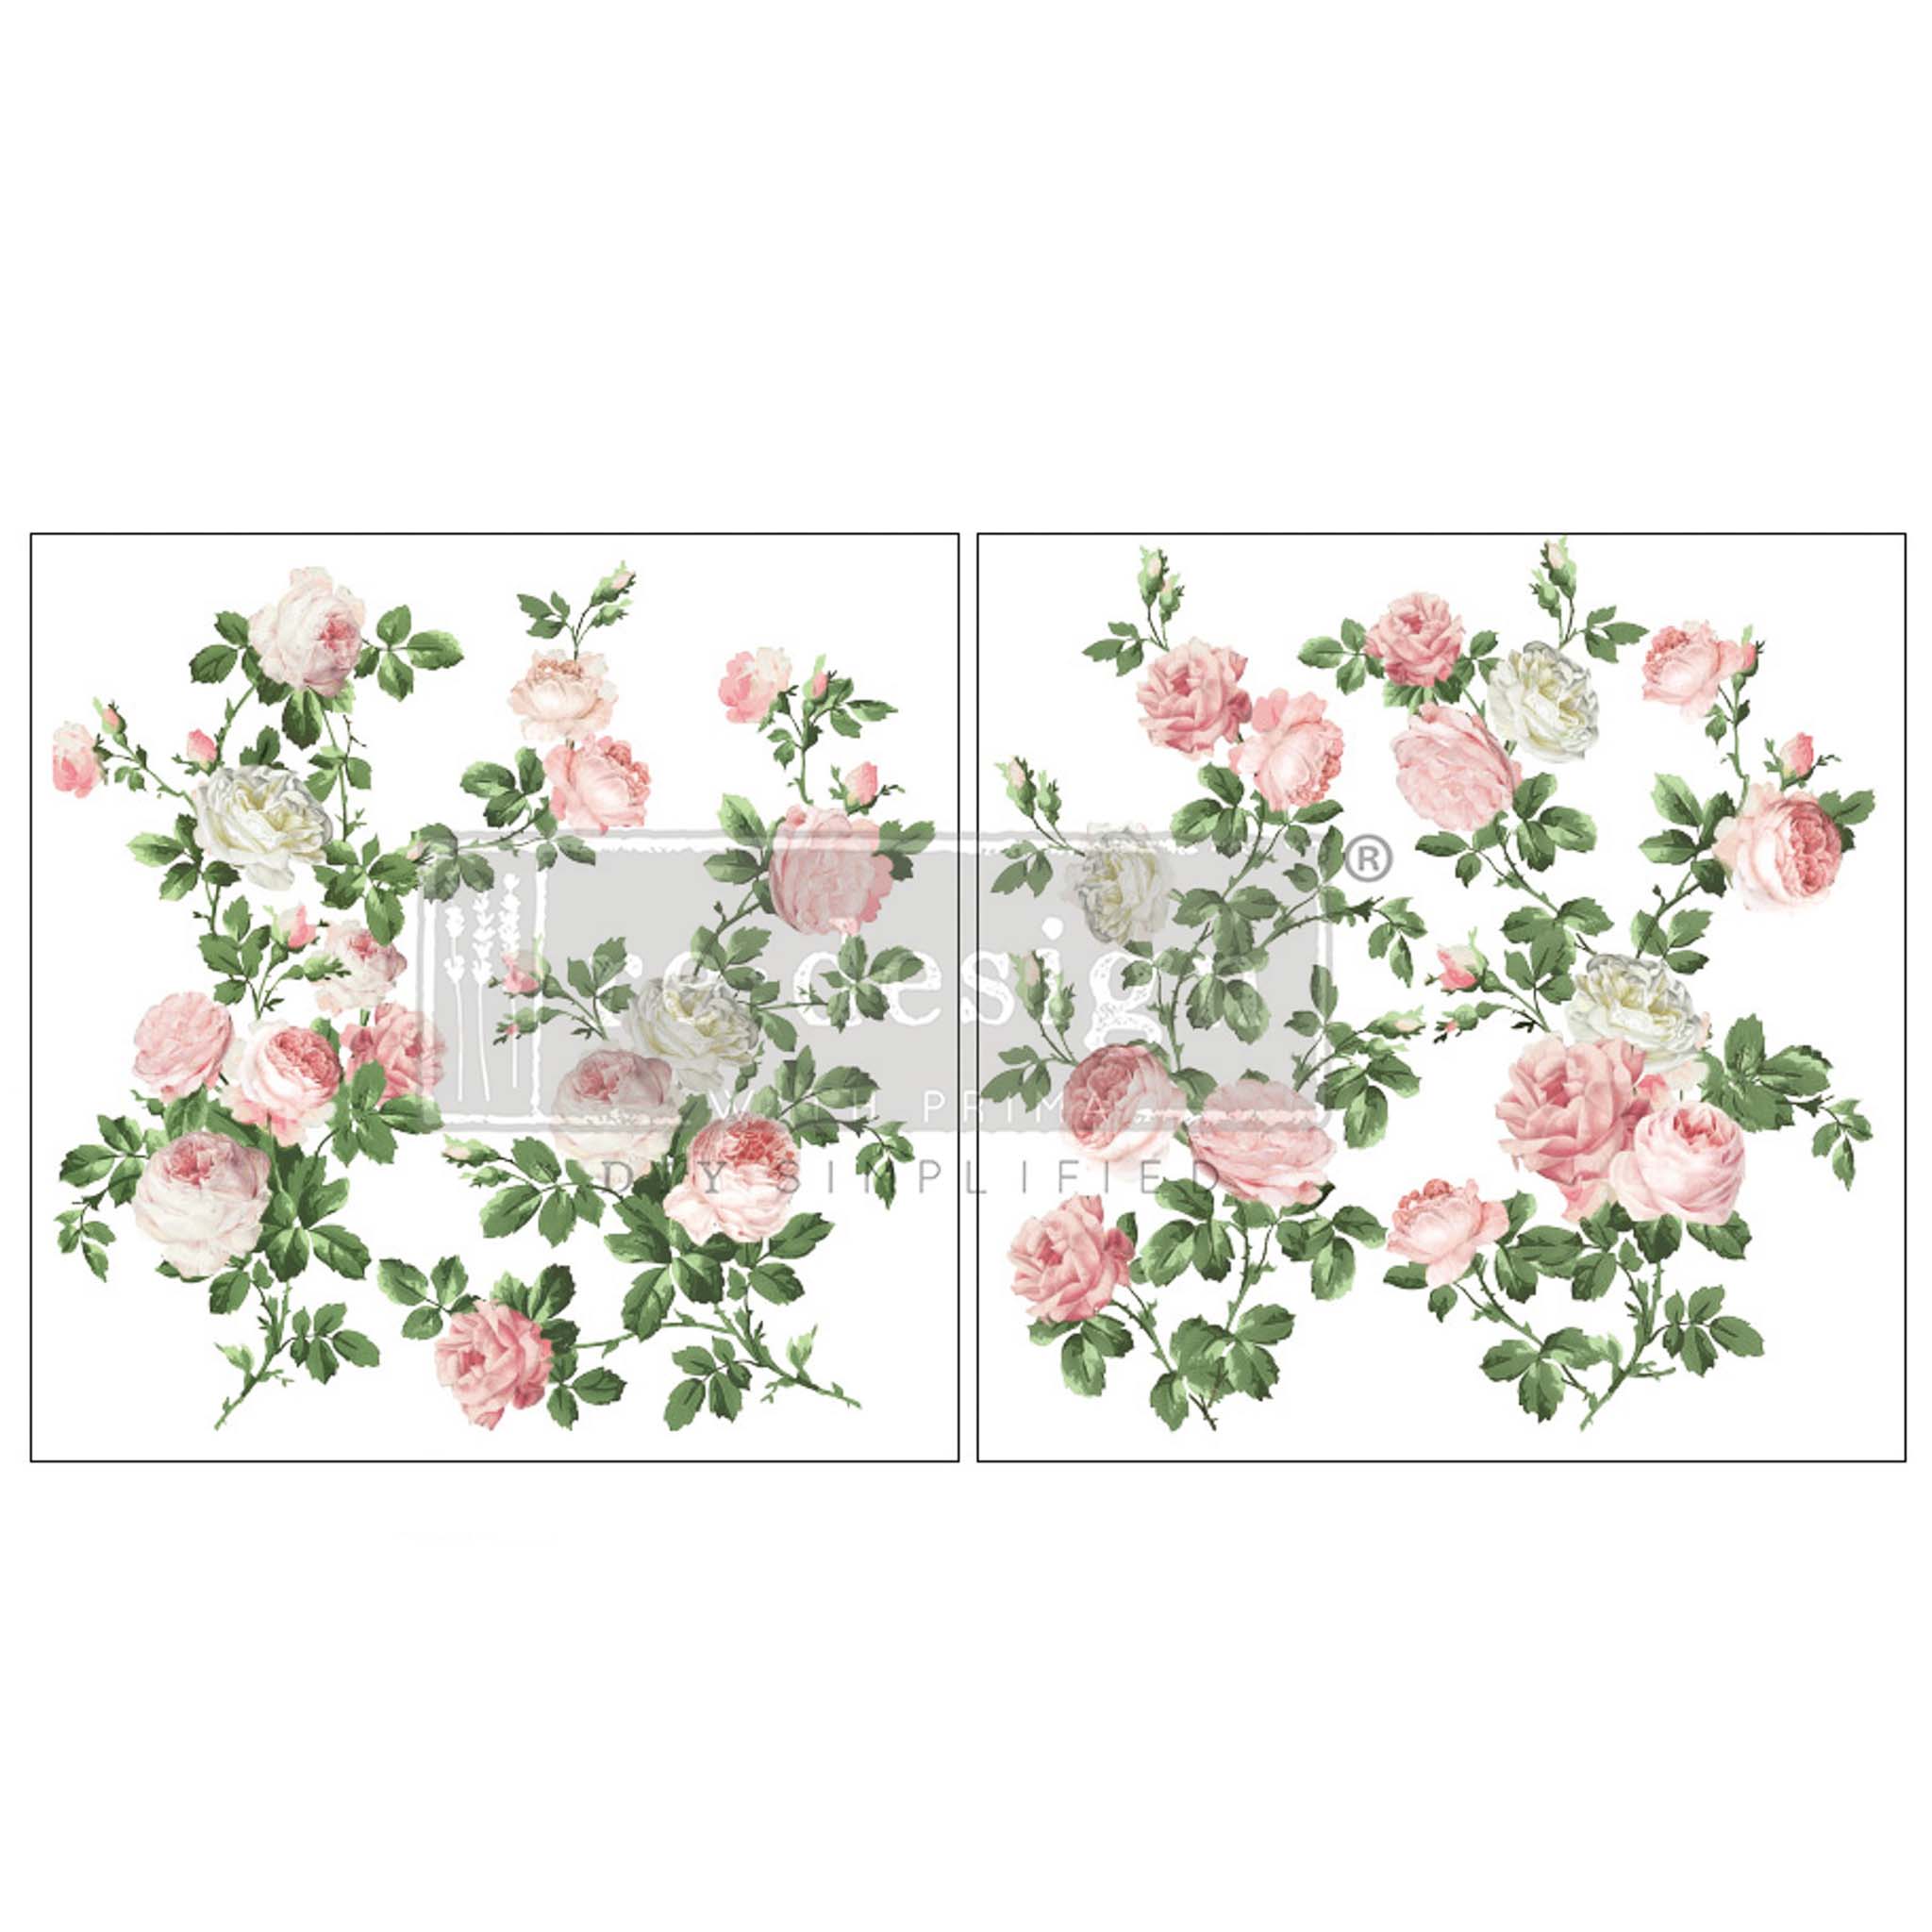 Two sheets of rub-on transfers featuring pretty pink and white roses with their green foliage.